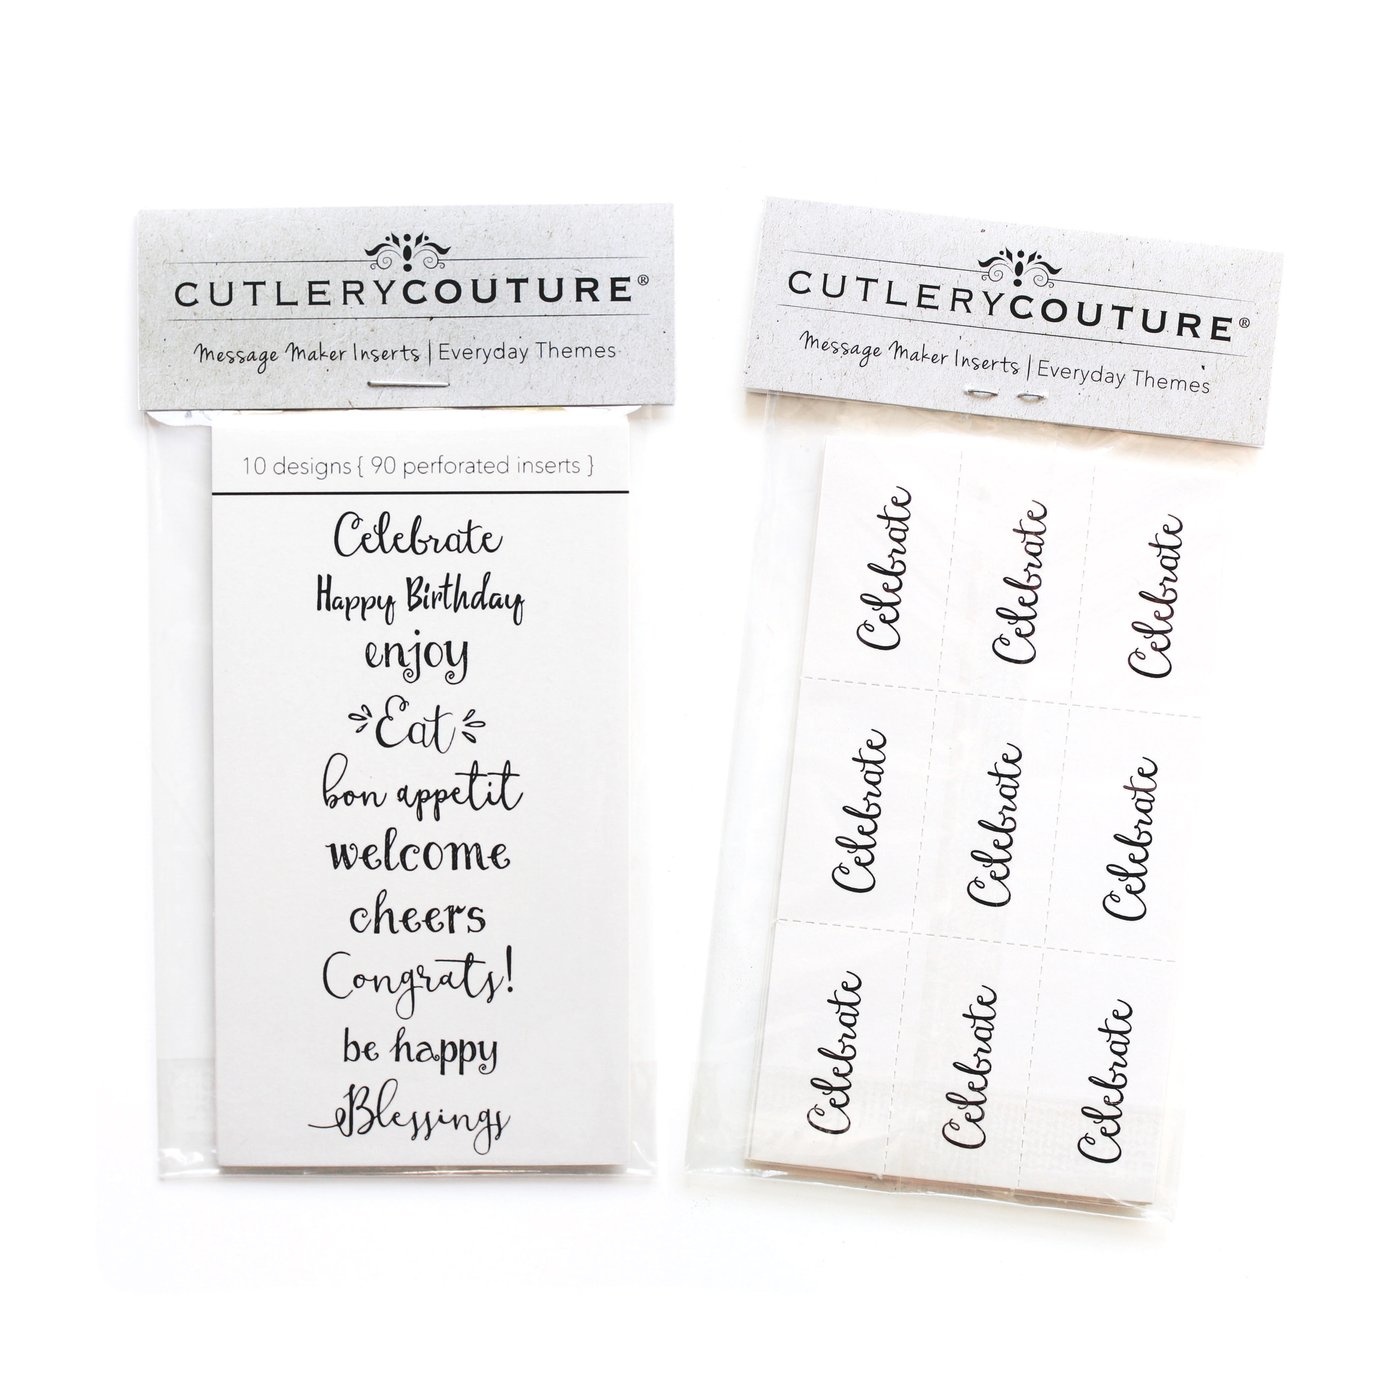 Cutlery Couture Paper inserts everyday